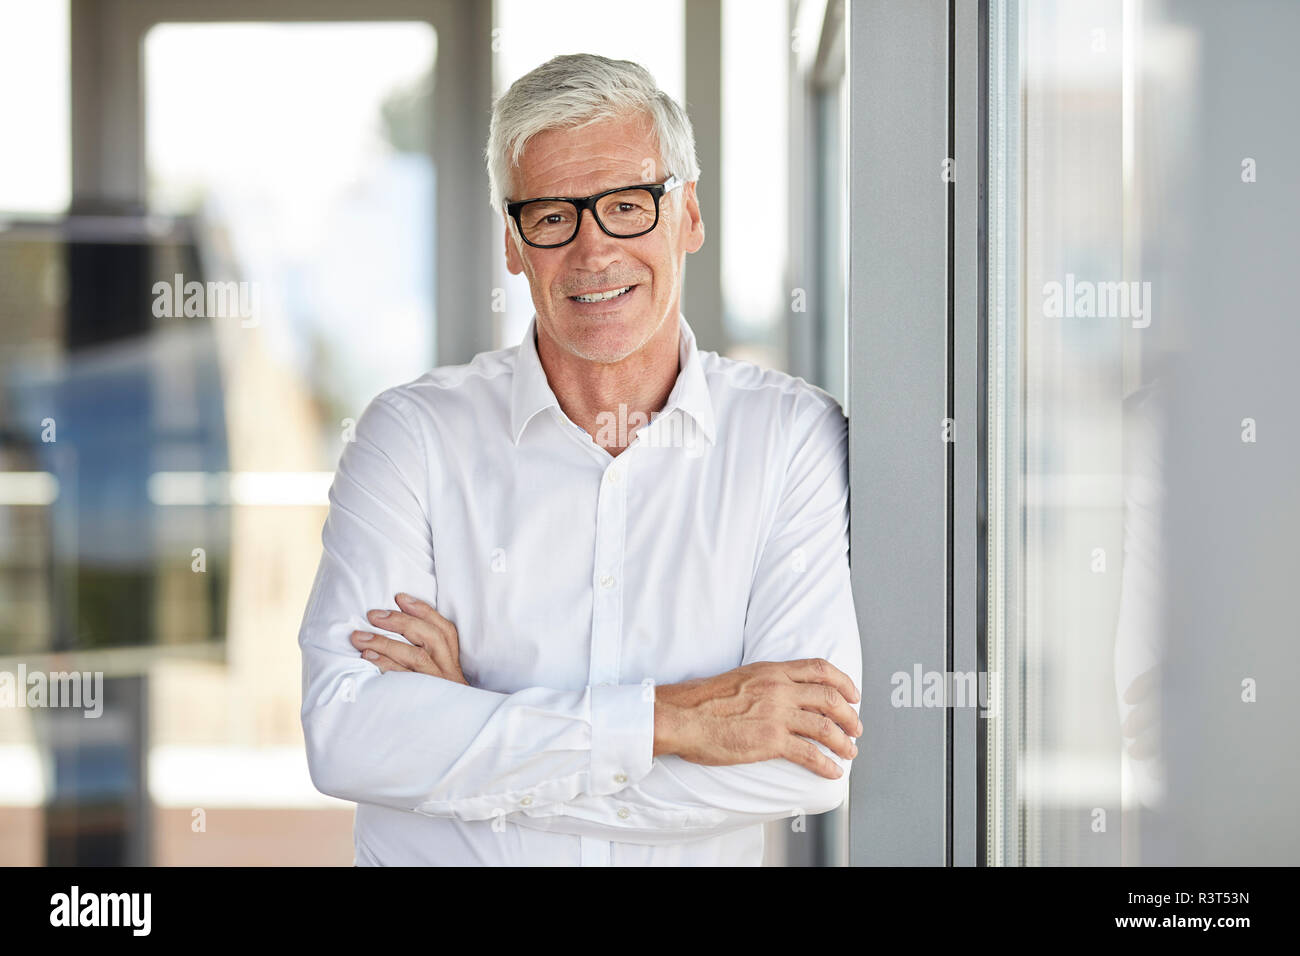 Businessman in office leaning against window, with arms crossed Stock Photo